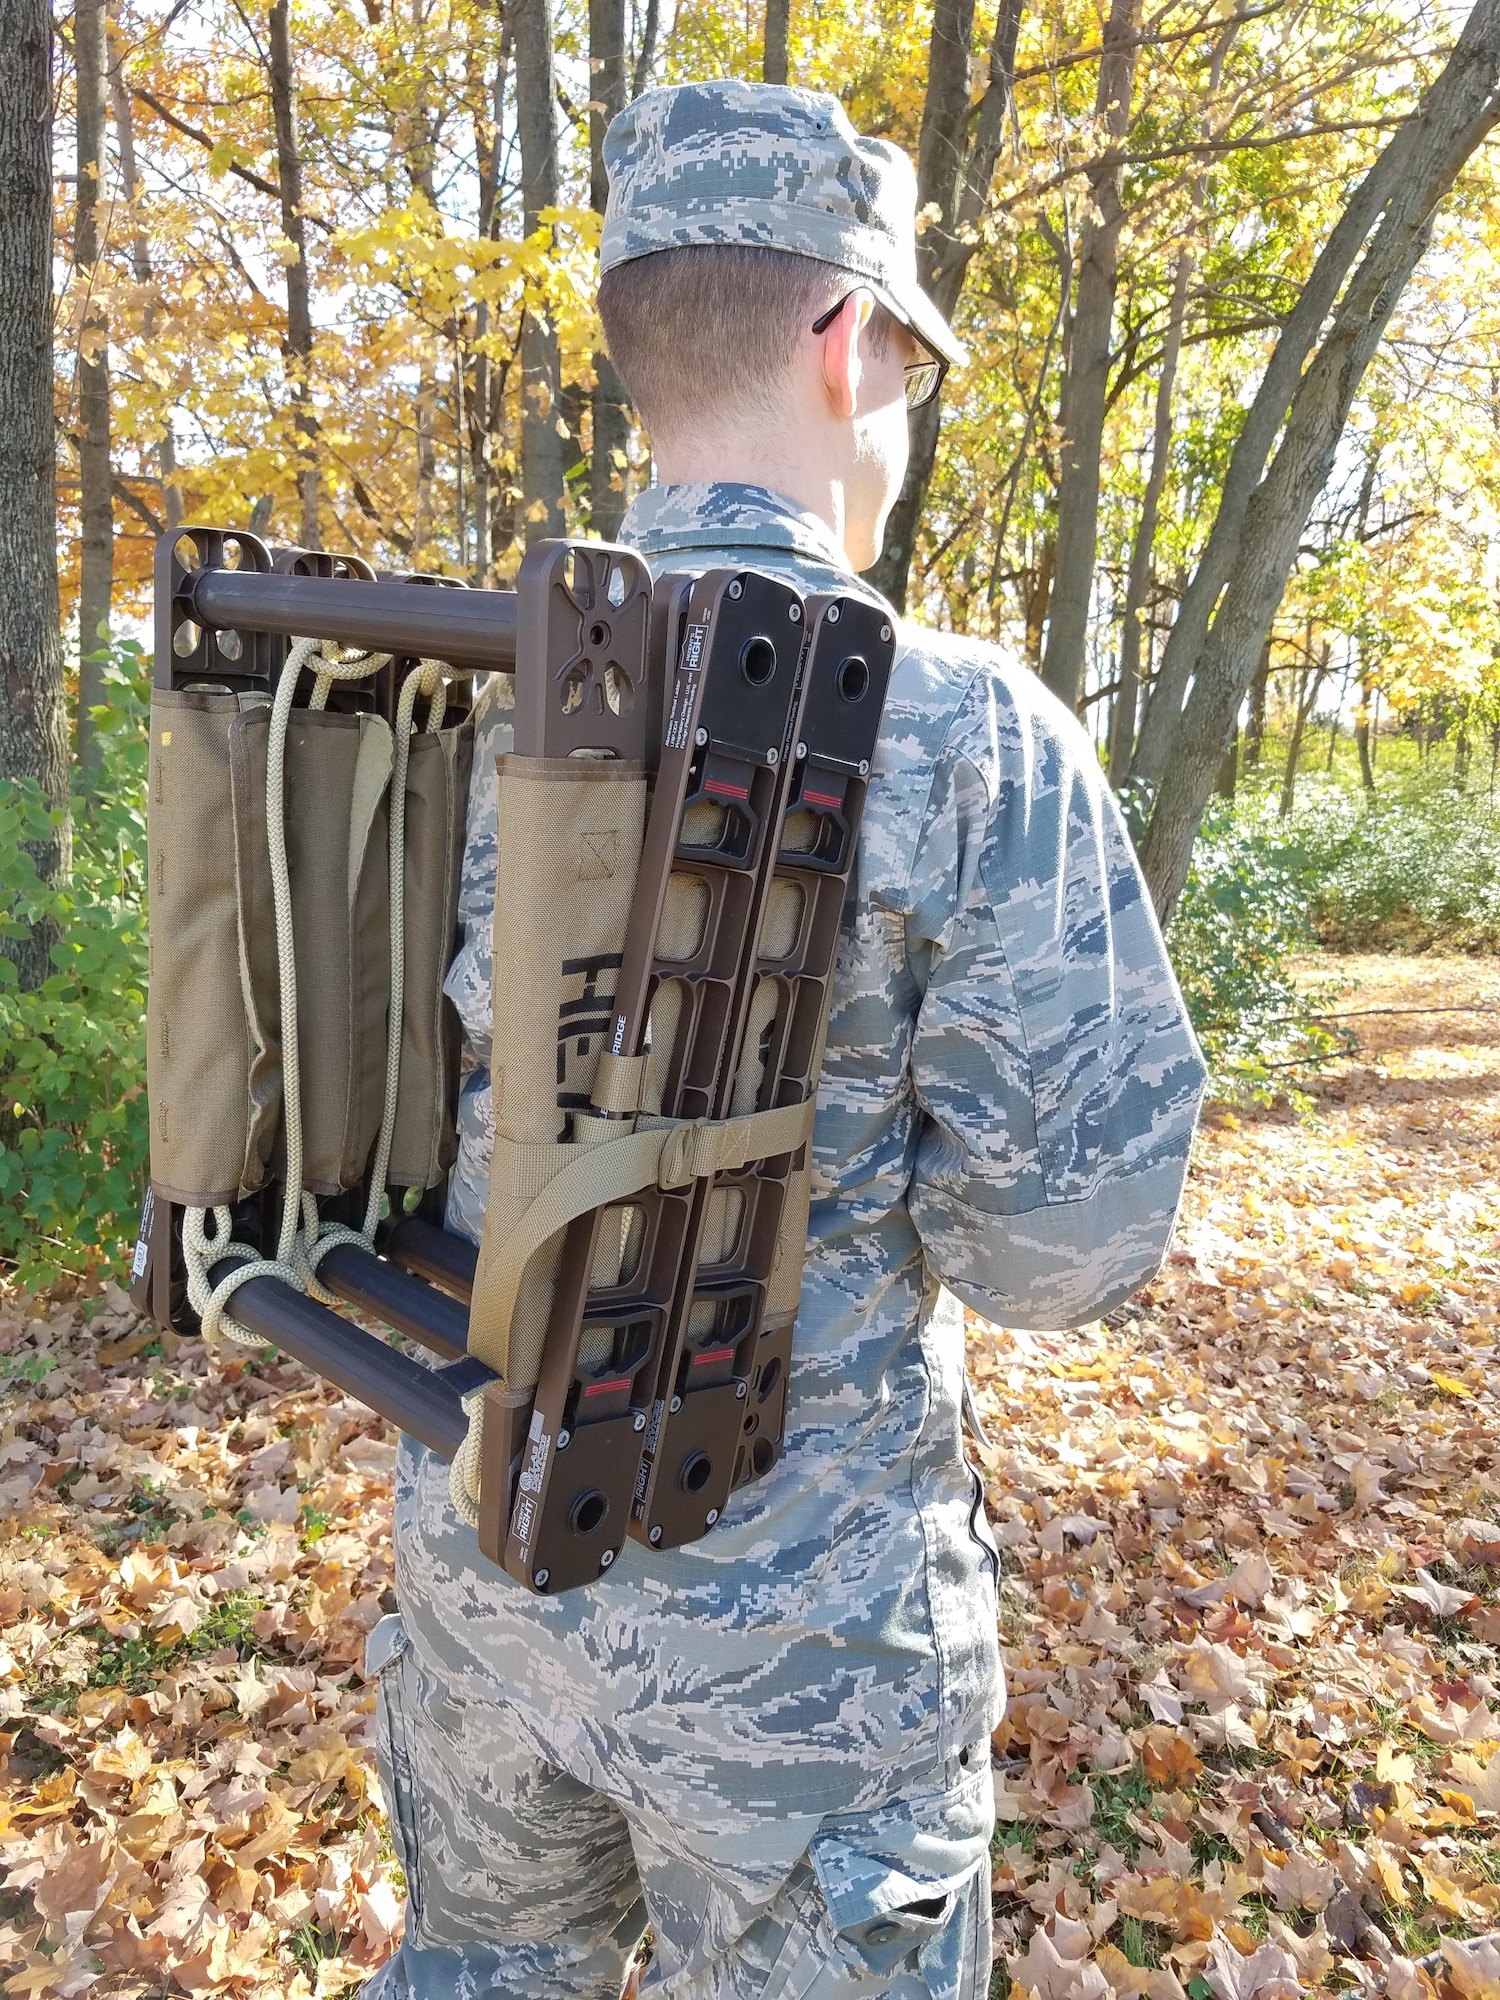 1st Lt. Stuart Baker demonstrates the portability of the JFWORX-developed Roco Atlas Casualty Carrier. This strong and lightweight tactical ladder can also function as bridge between structures and as a stretcher to transport injured personnel. (U.S. Air Force photo/Holly Jordan)